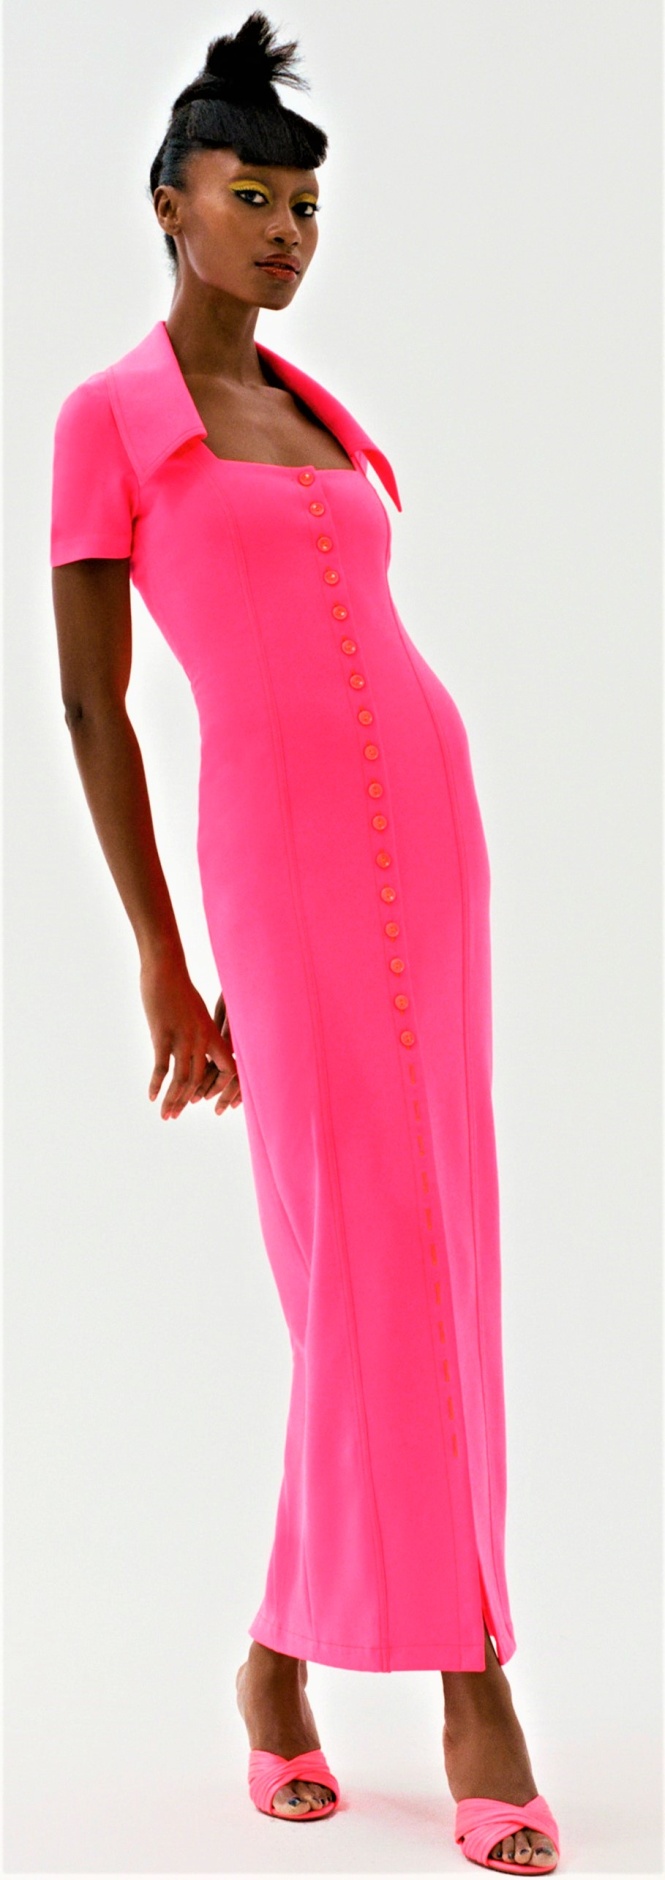 PreFall 2022 CJR pink long gown cropped.jpg